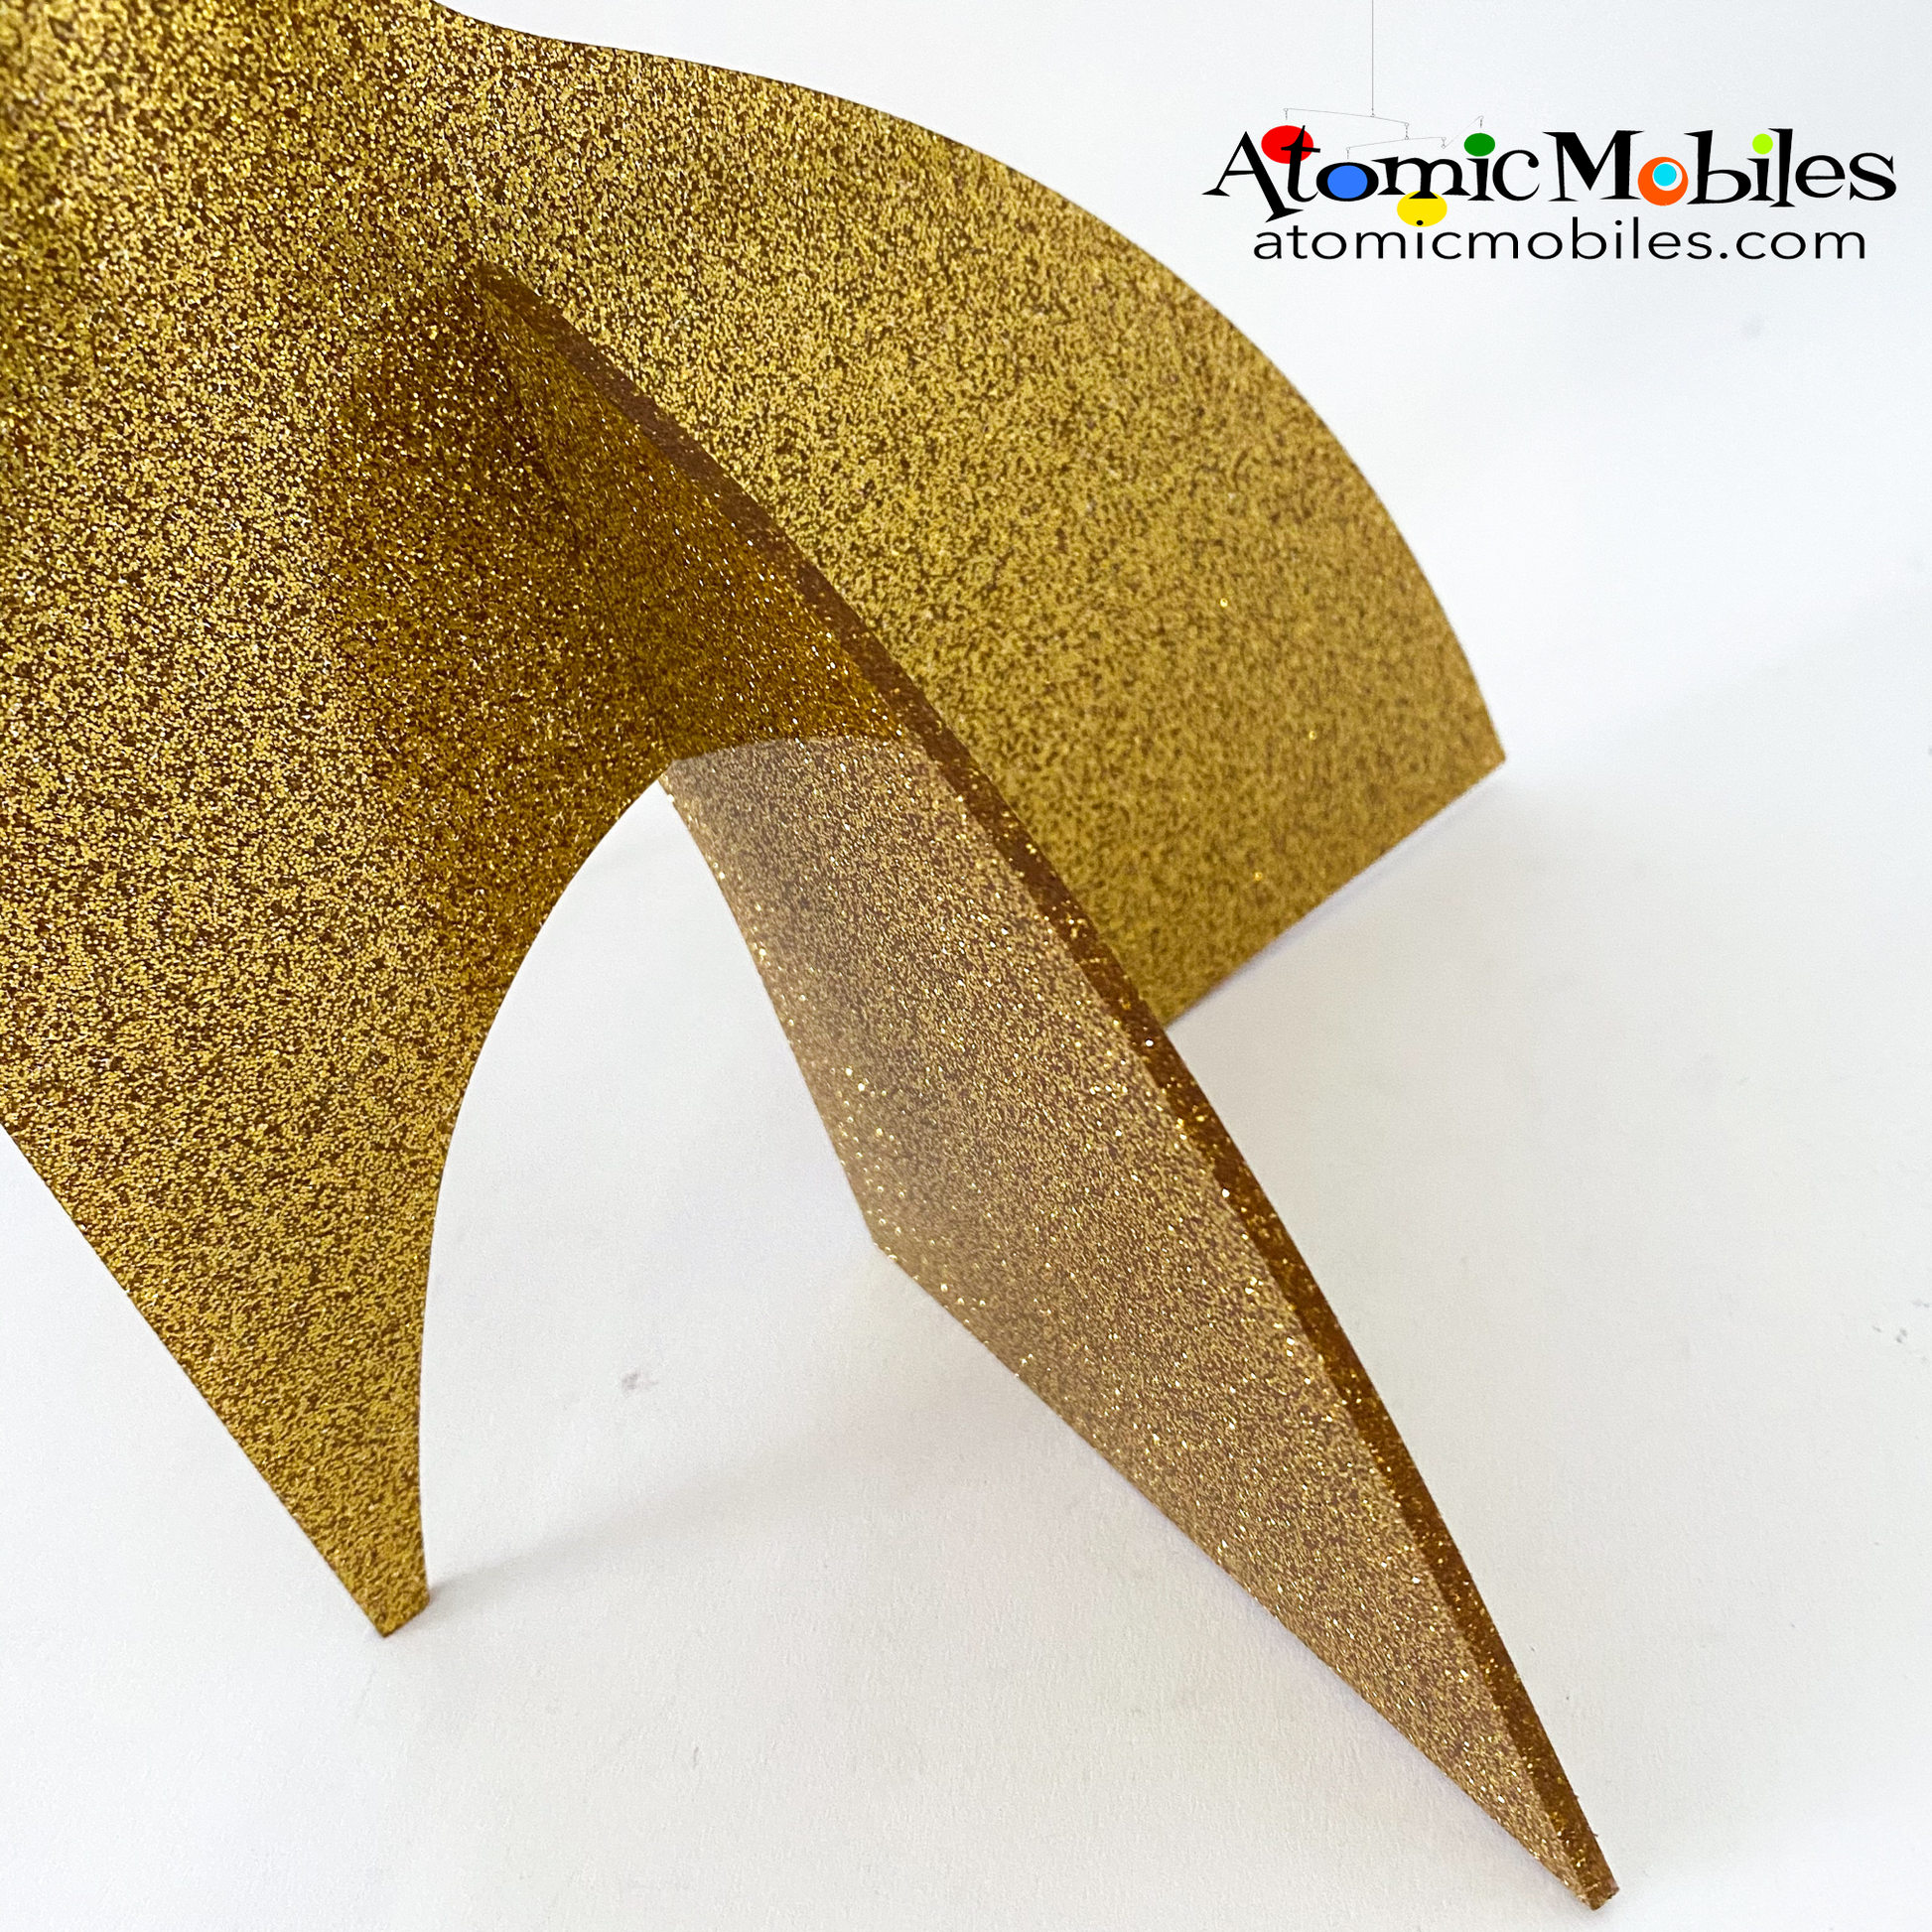 Closeup of Gorgeous Glitter Gold Modern Art Sculpture Stabile - Limited Edition Kinetic Art by AtomicMobiles.com